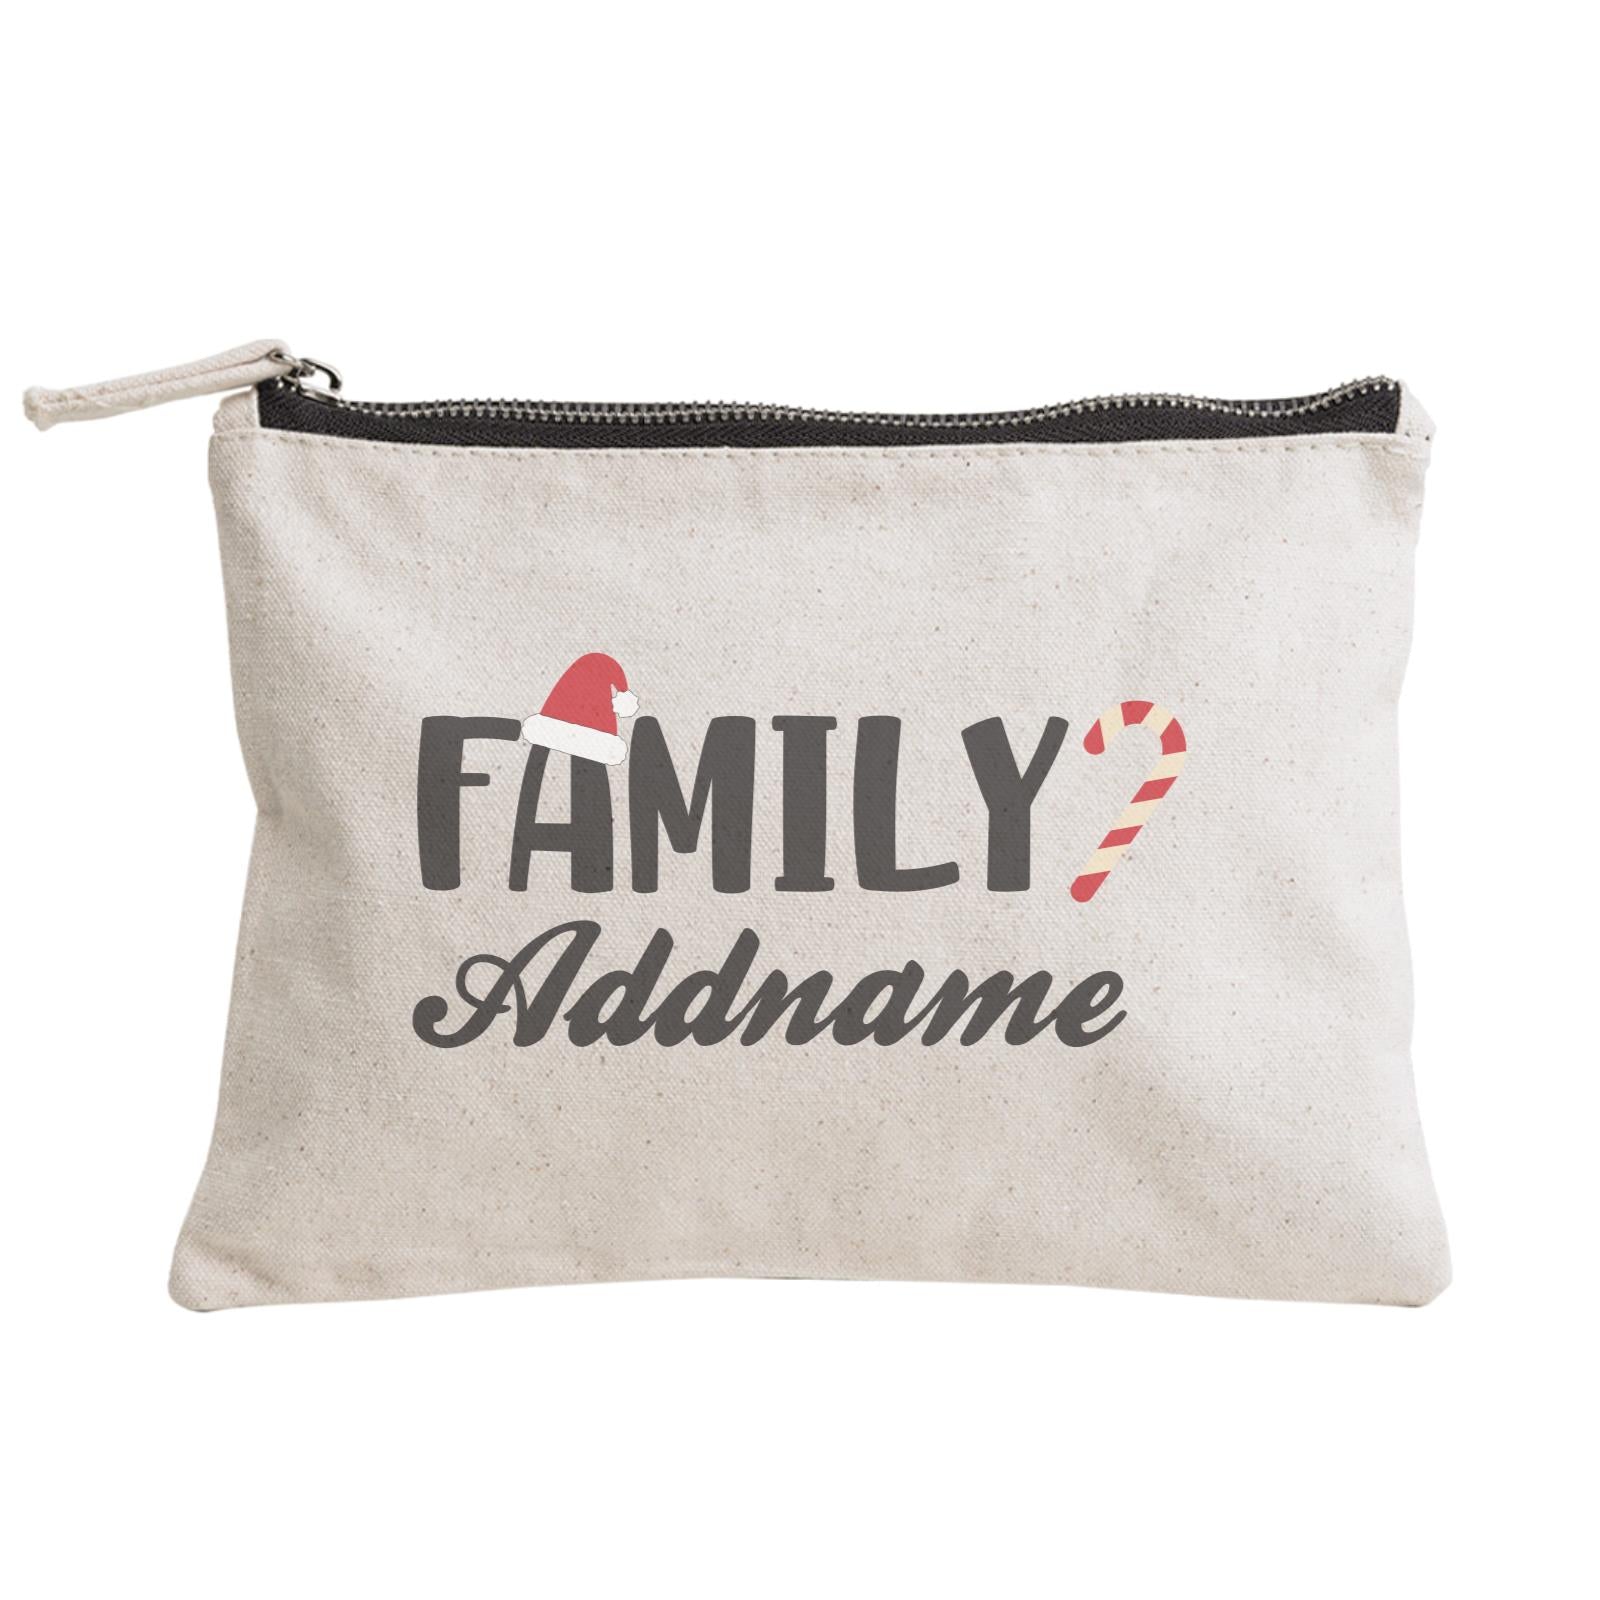 Christmas Series Family Addname with Santa Hat and Candy Cane Zipper Pouch